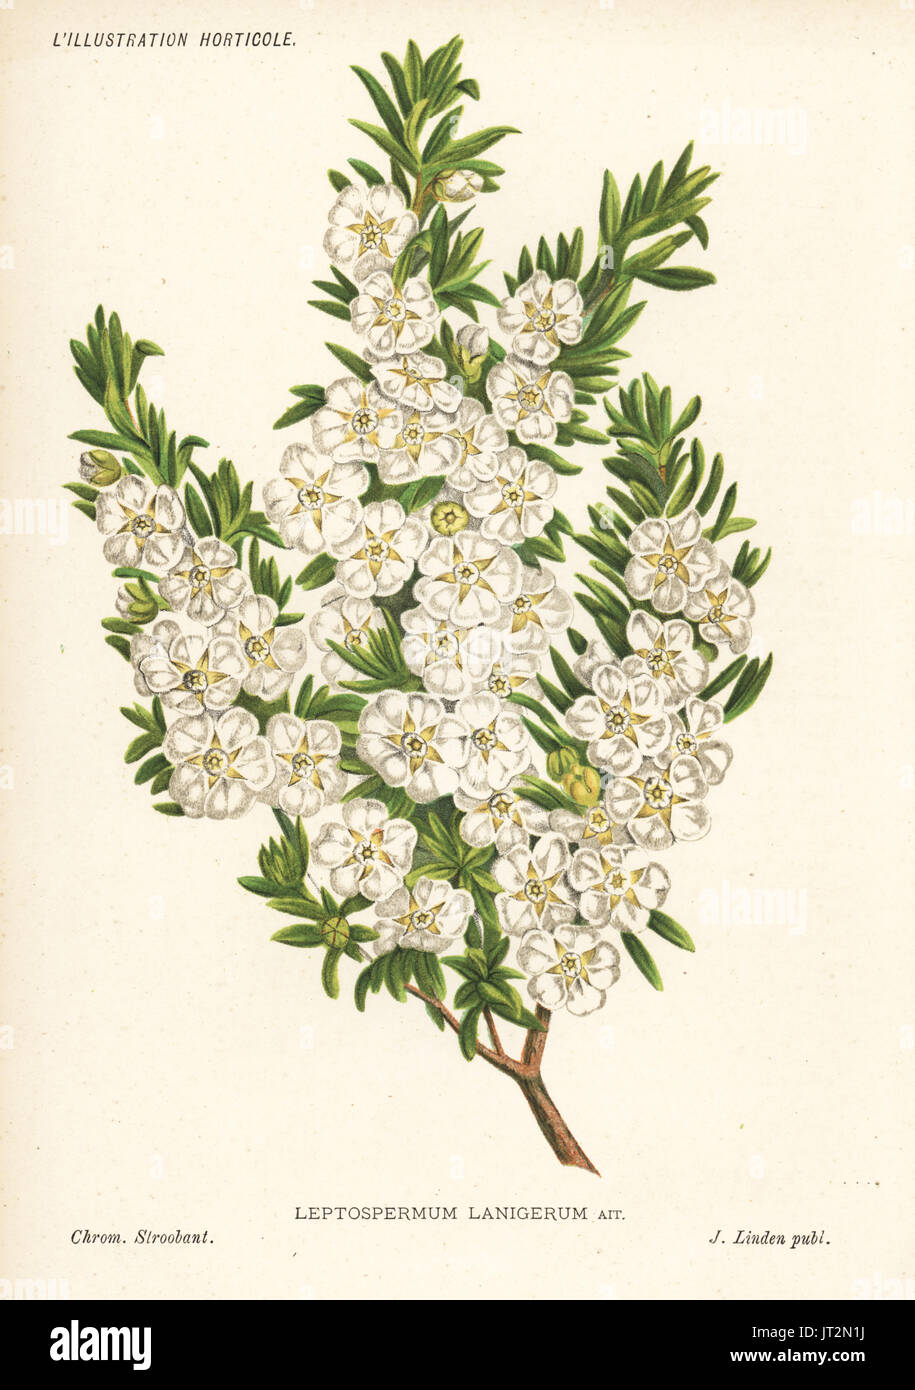 Woolly tea-tree, Leptospermum lanigerum. Chromolithograph by Stroobant from Jean Linden's l'Illustration Horticole, Brussels, 1885. Stock Photo